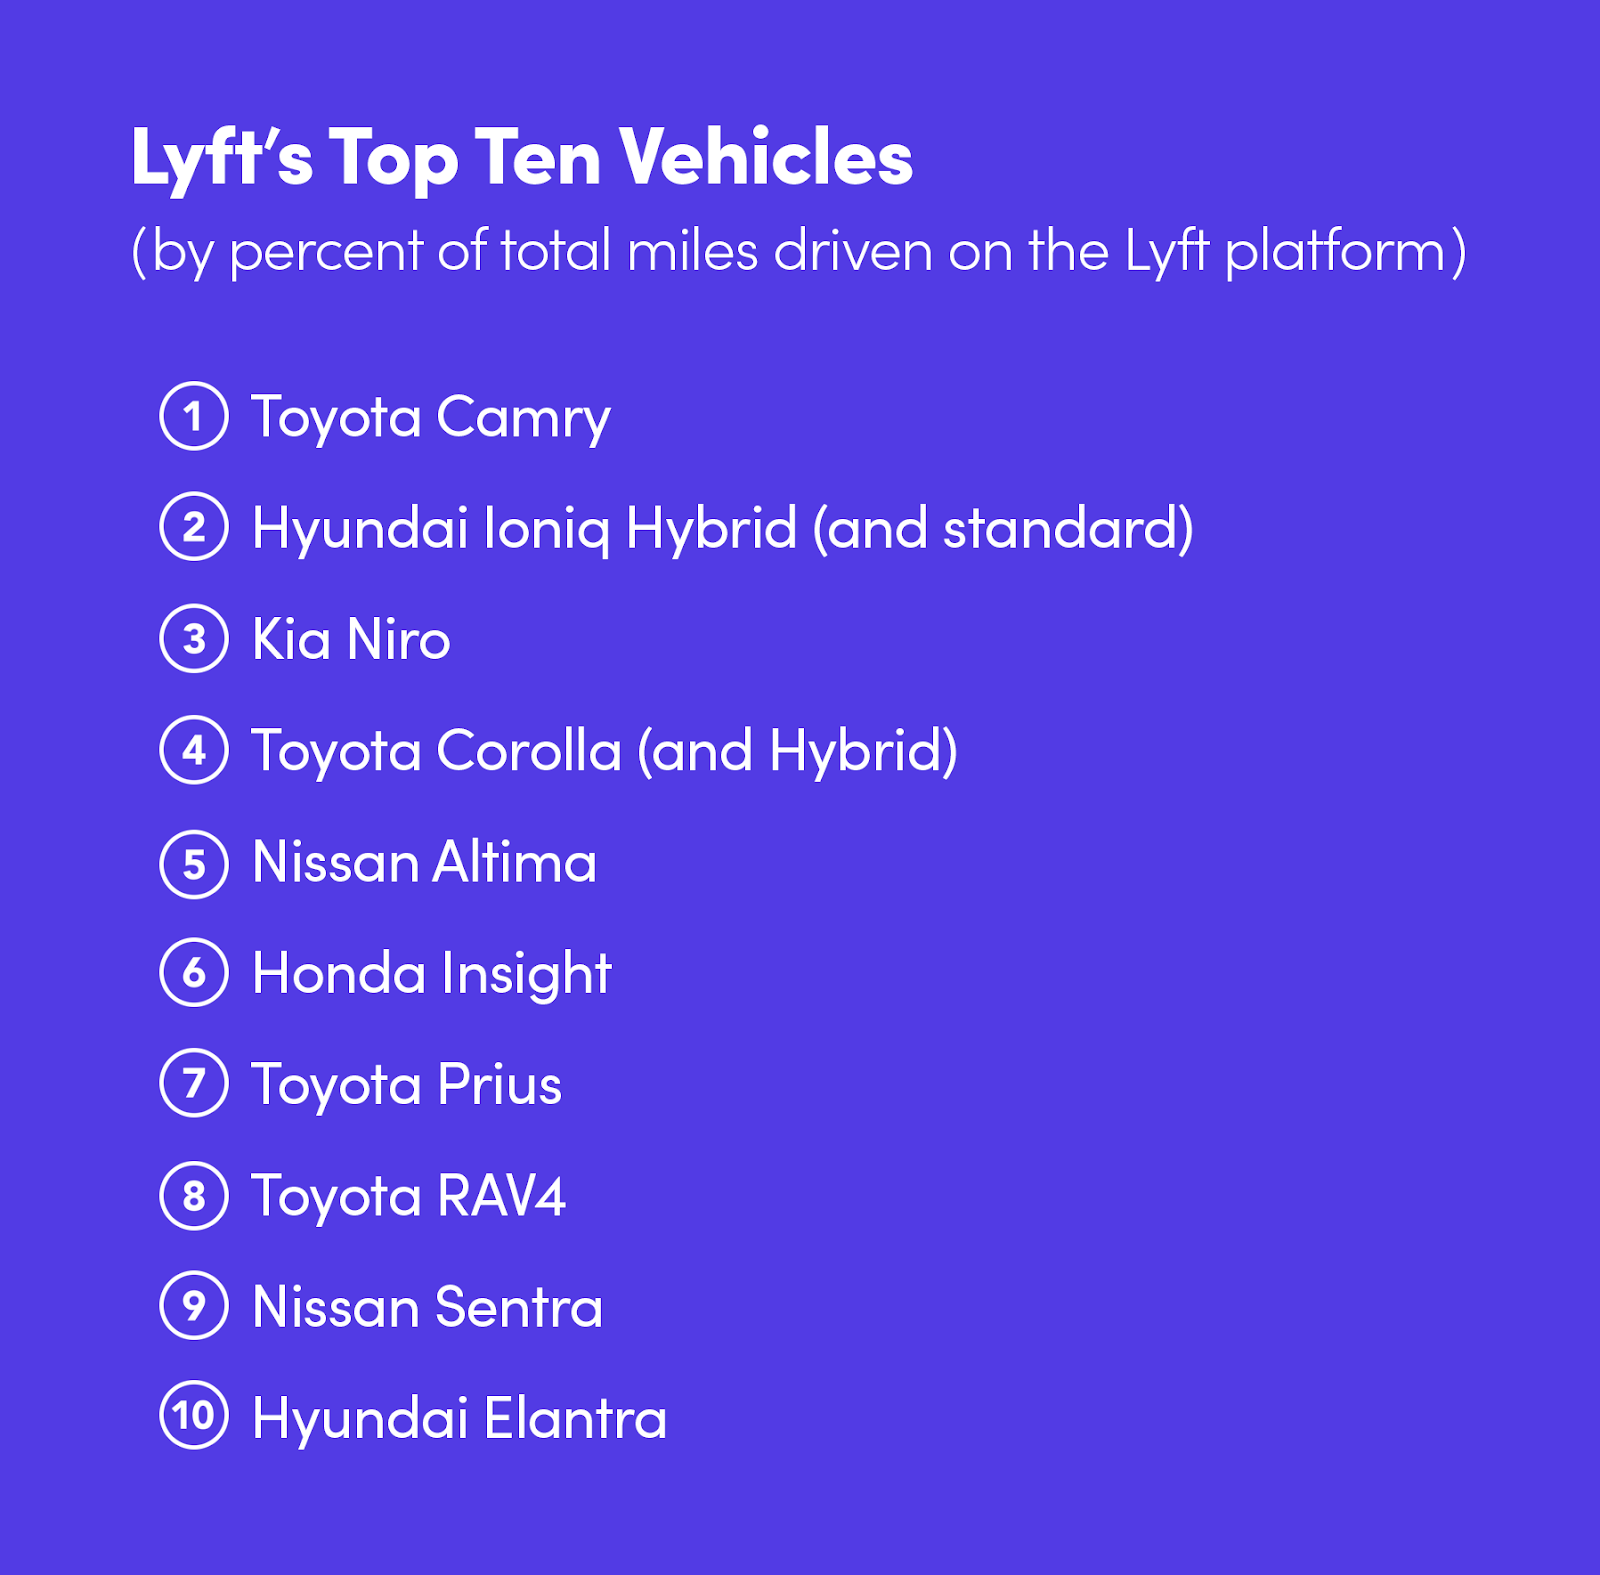 Top 10 vehicles on the Lyft platform by percentage of total miles driven. Credit: Lyft